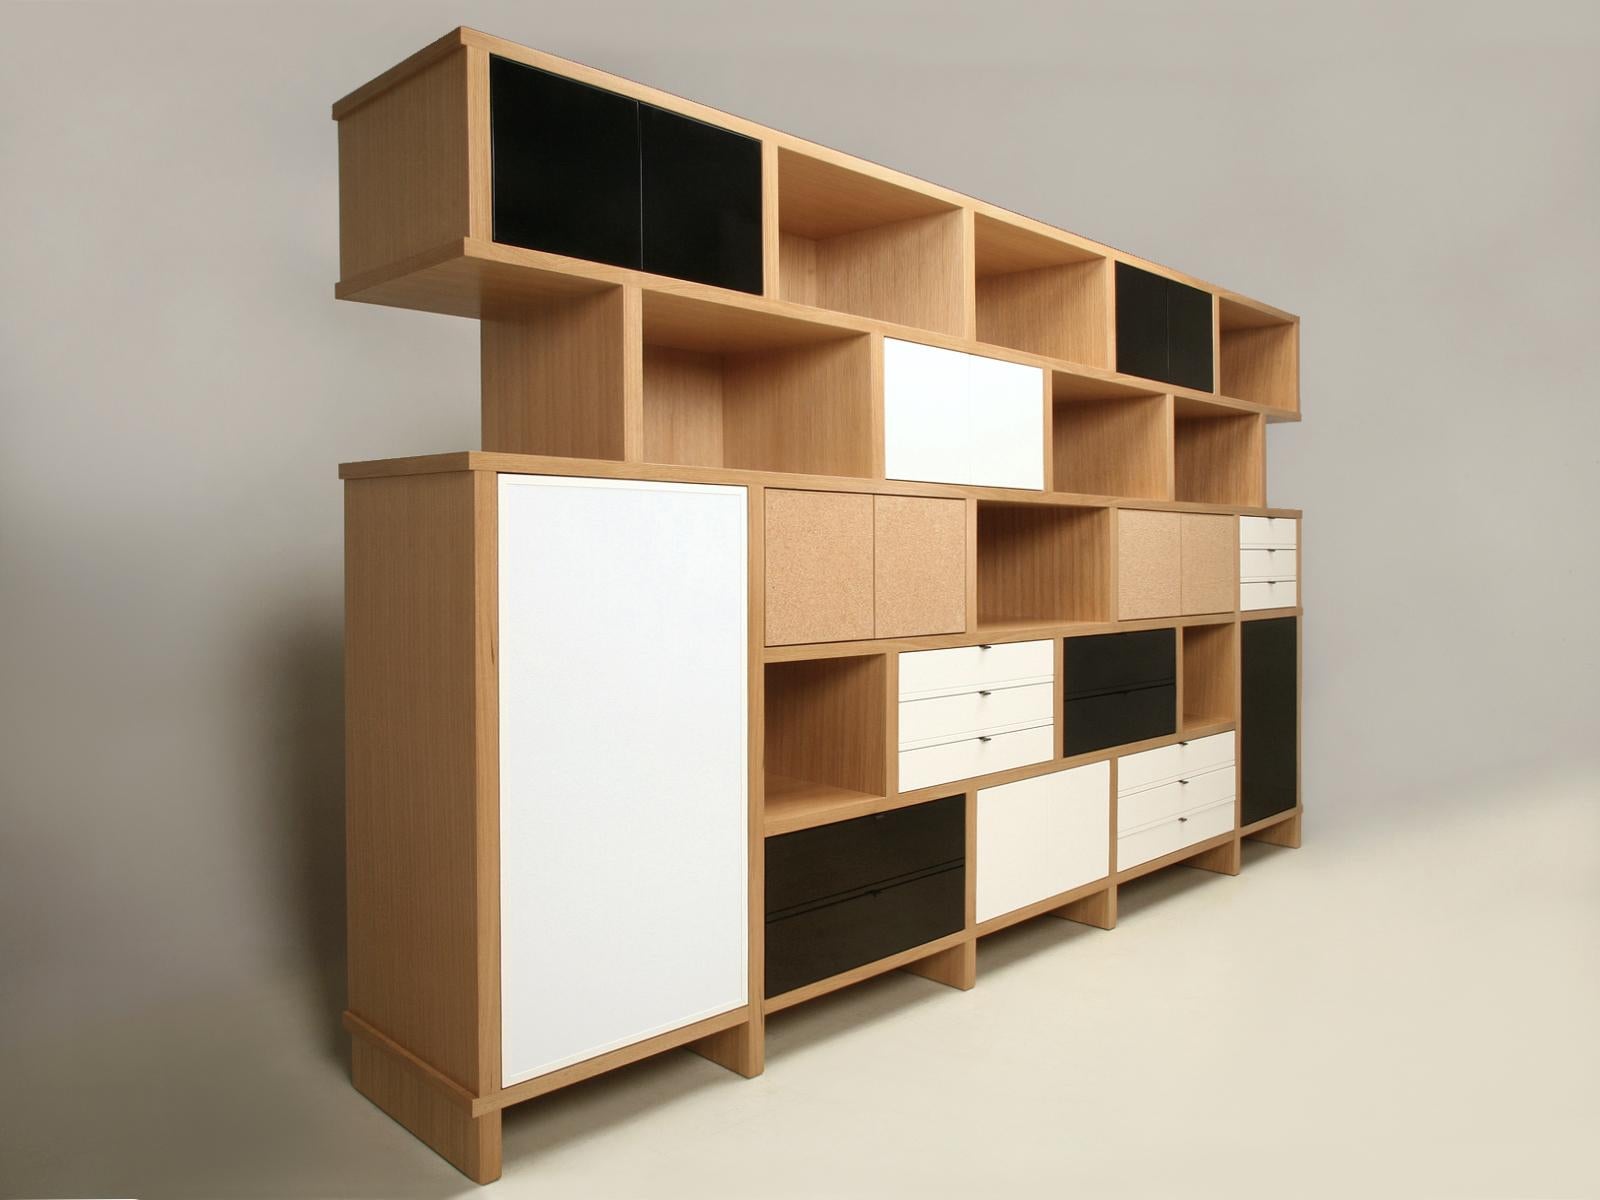 Handcrafted Charlotte Perriand inspired huge bookcase, built in our old plank workshop to your specifications. This is taking Charlotte Perriand ‘s incredible Nuage bookcase design to an another level in functionality, where there are drawers that